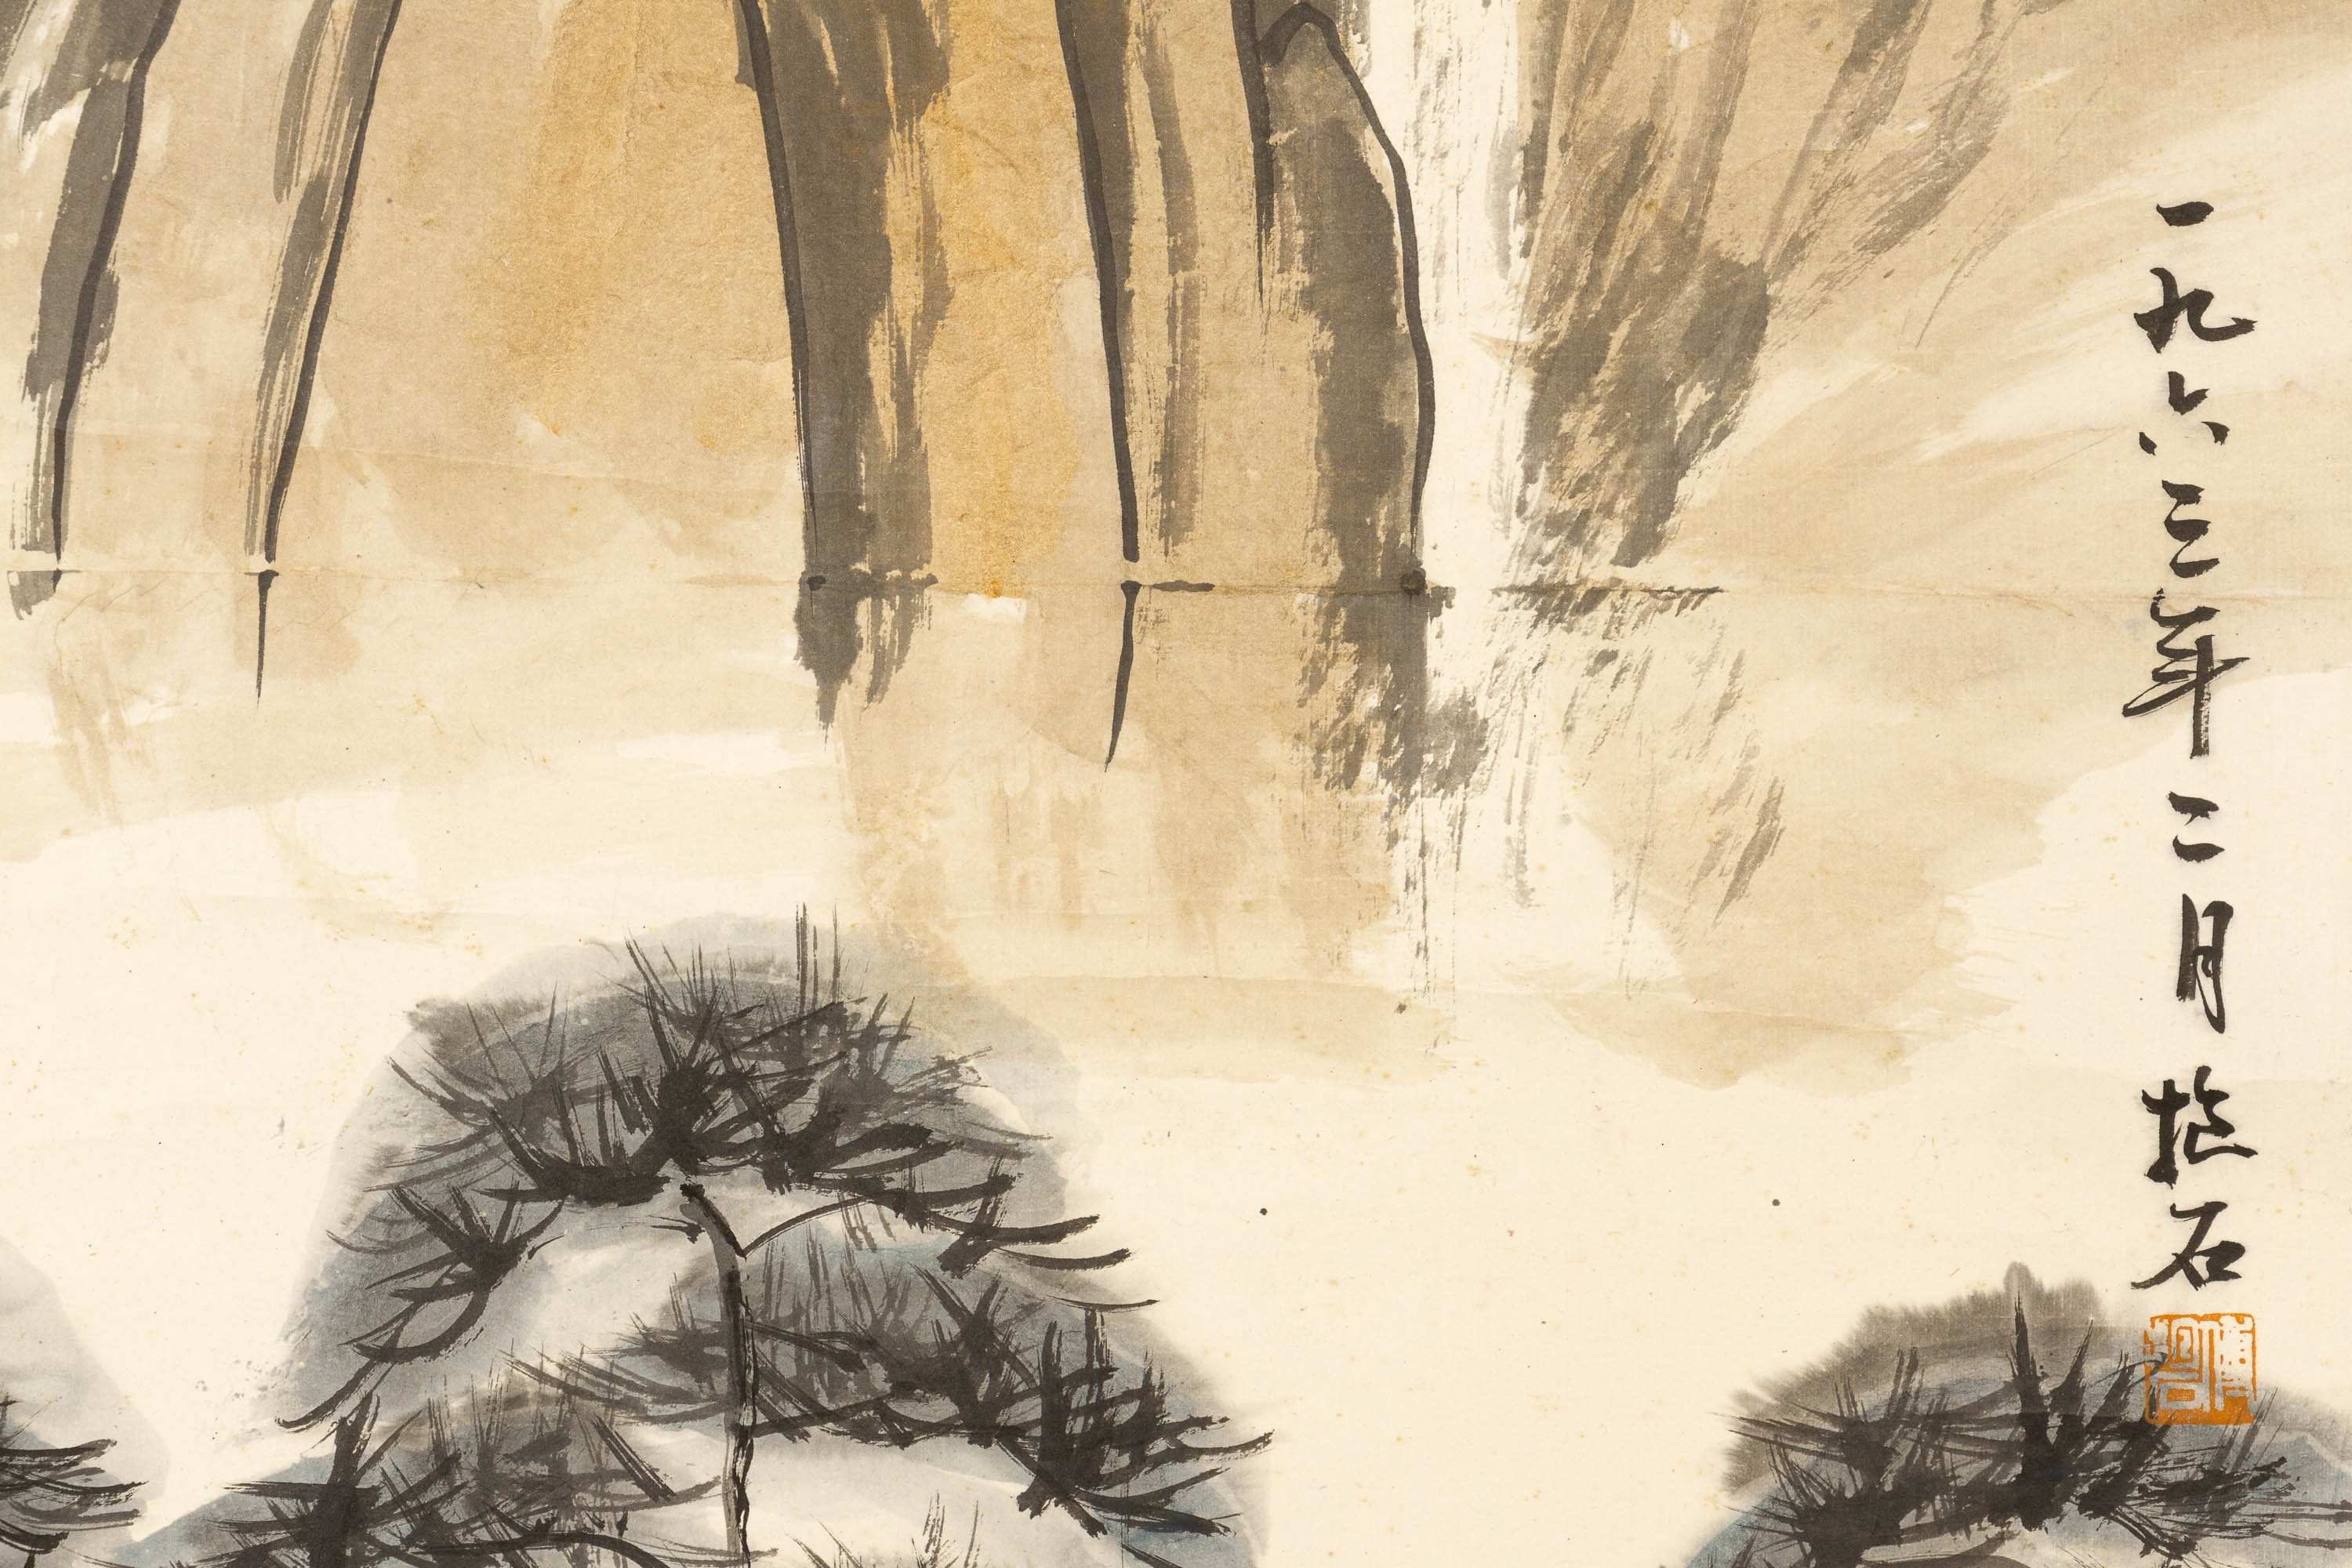 A CHINESE LANDSCAPE SCROLL IN THE STYLE OF HE XIANGNING - Image 2 of 3